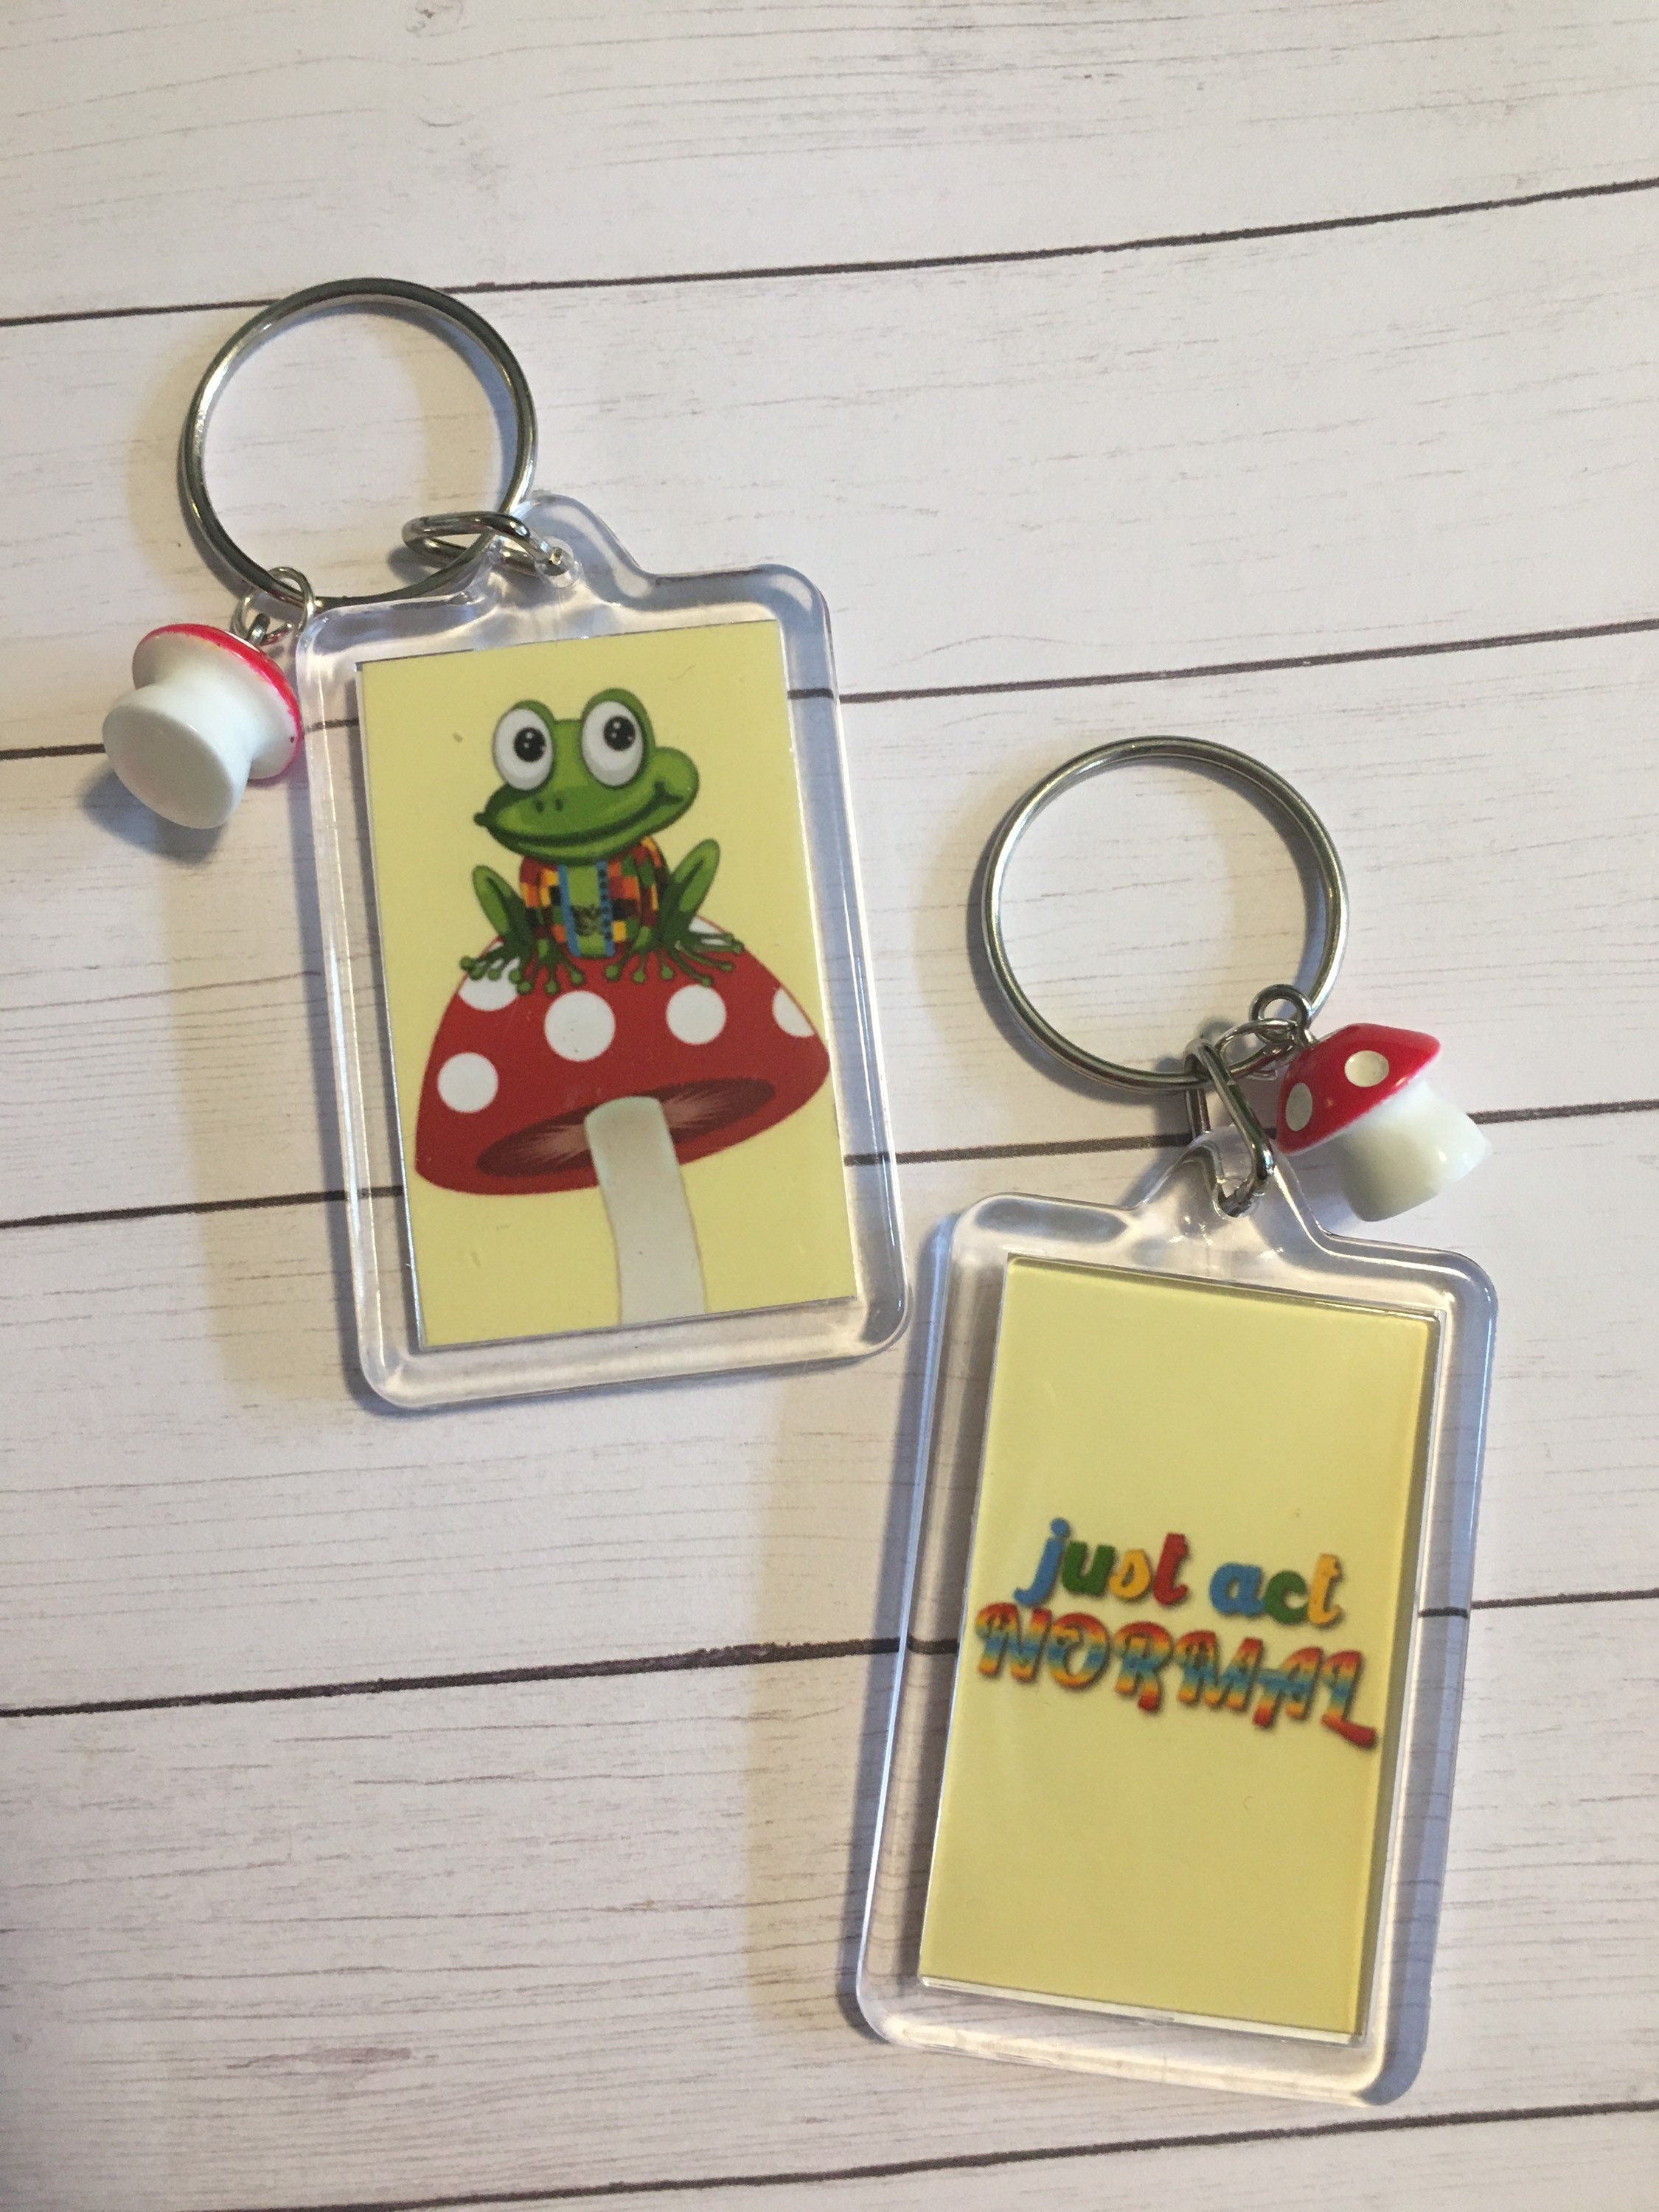 Harry Styles Inspired Frog Keychain Just Act Normal Keep - Etsy